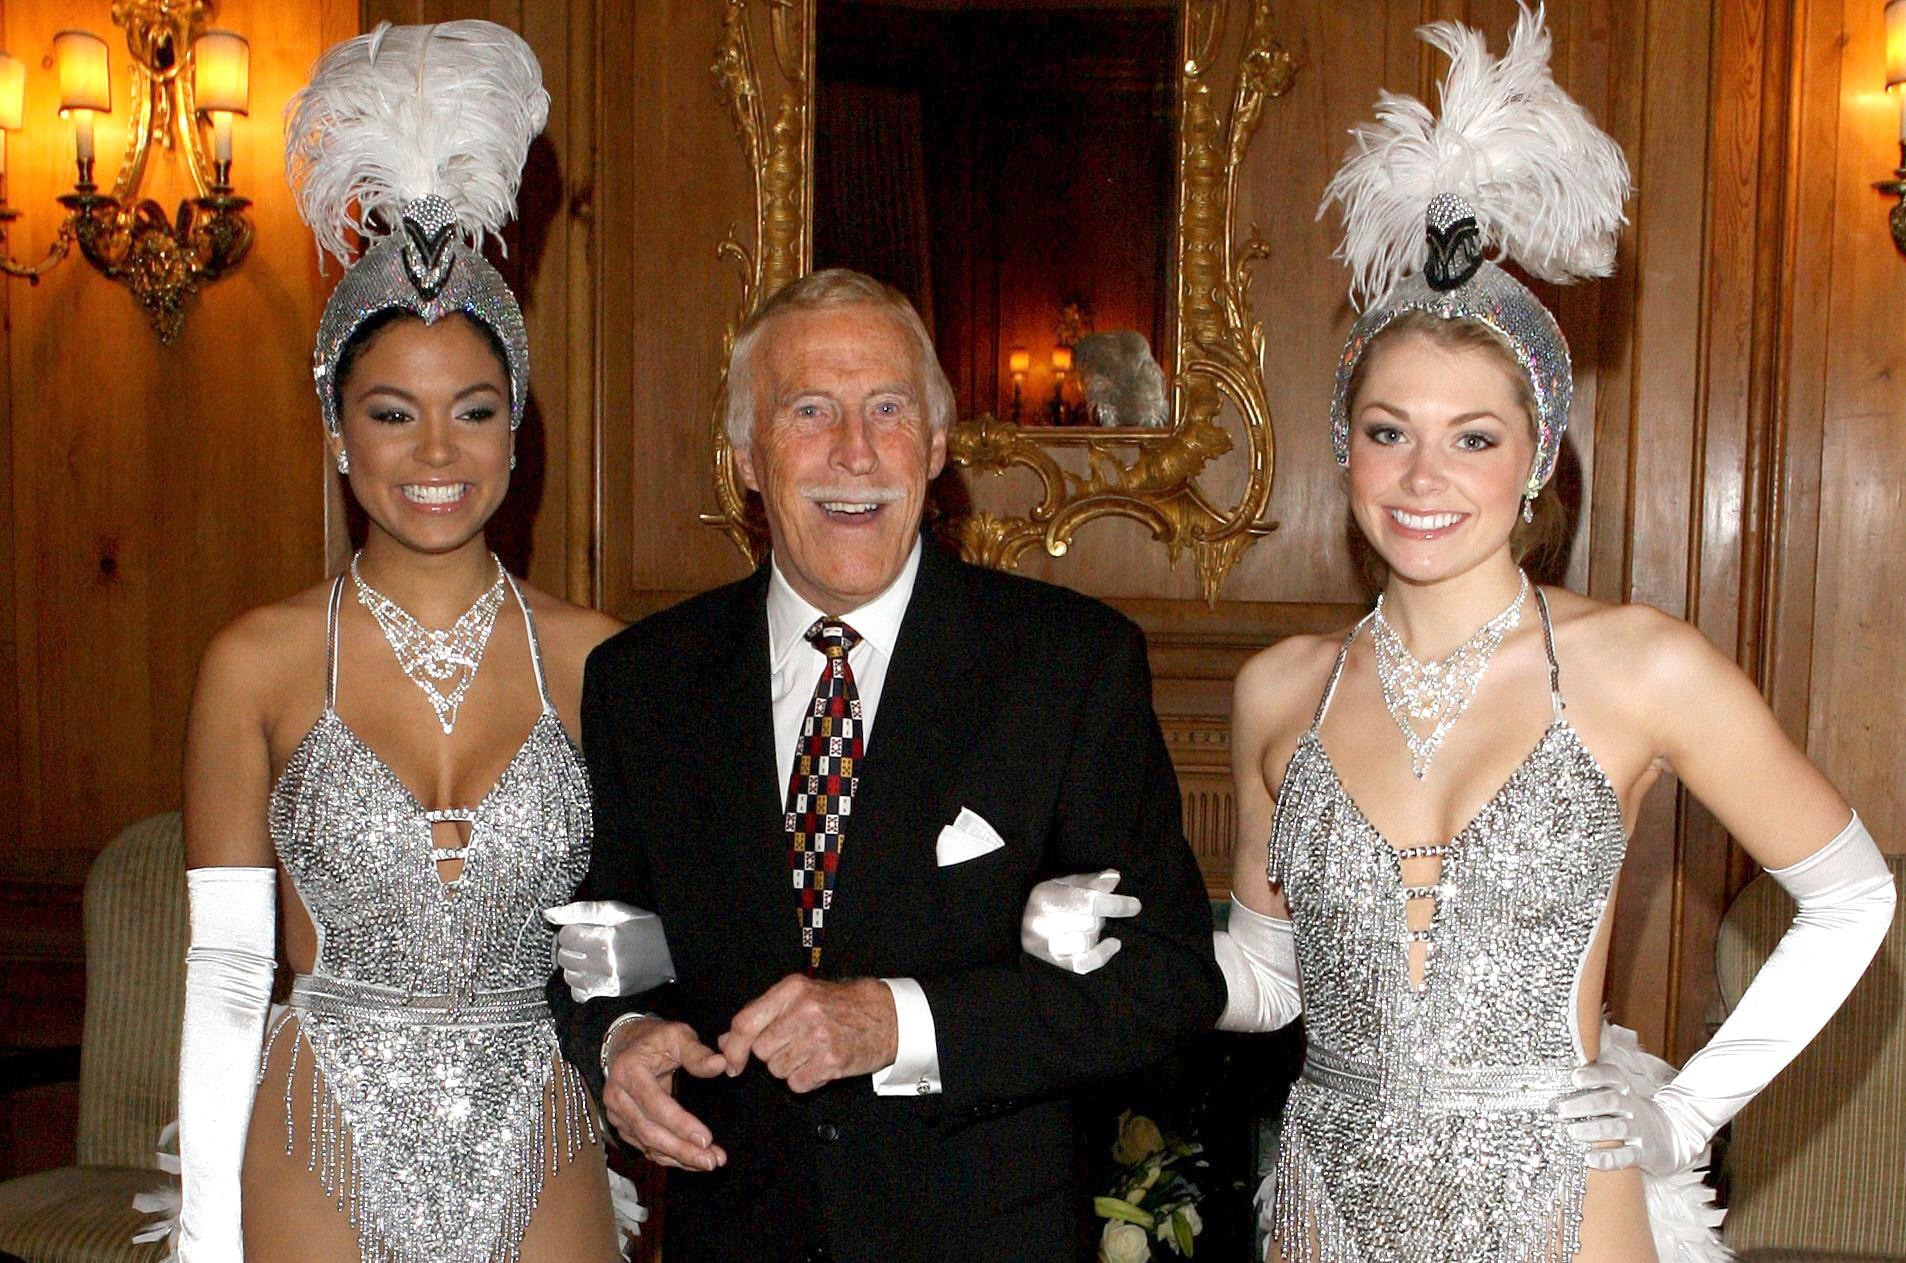 On his 80th birthday he was joined by Miss Puerto Rico (left) and Miss England dressed as showgirls (PA)